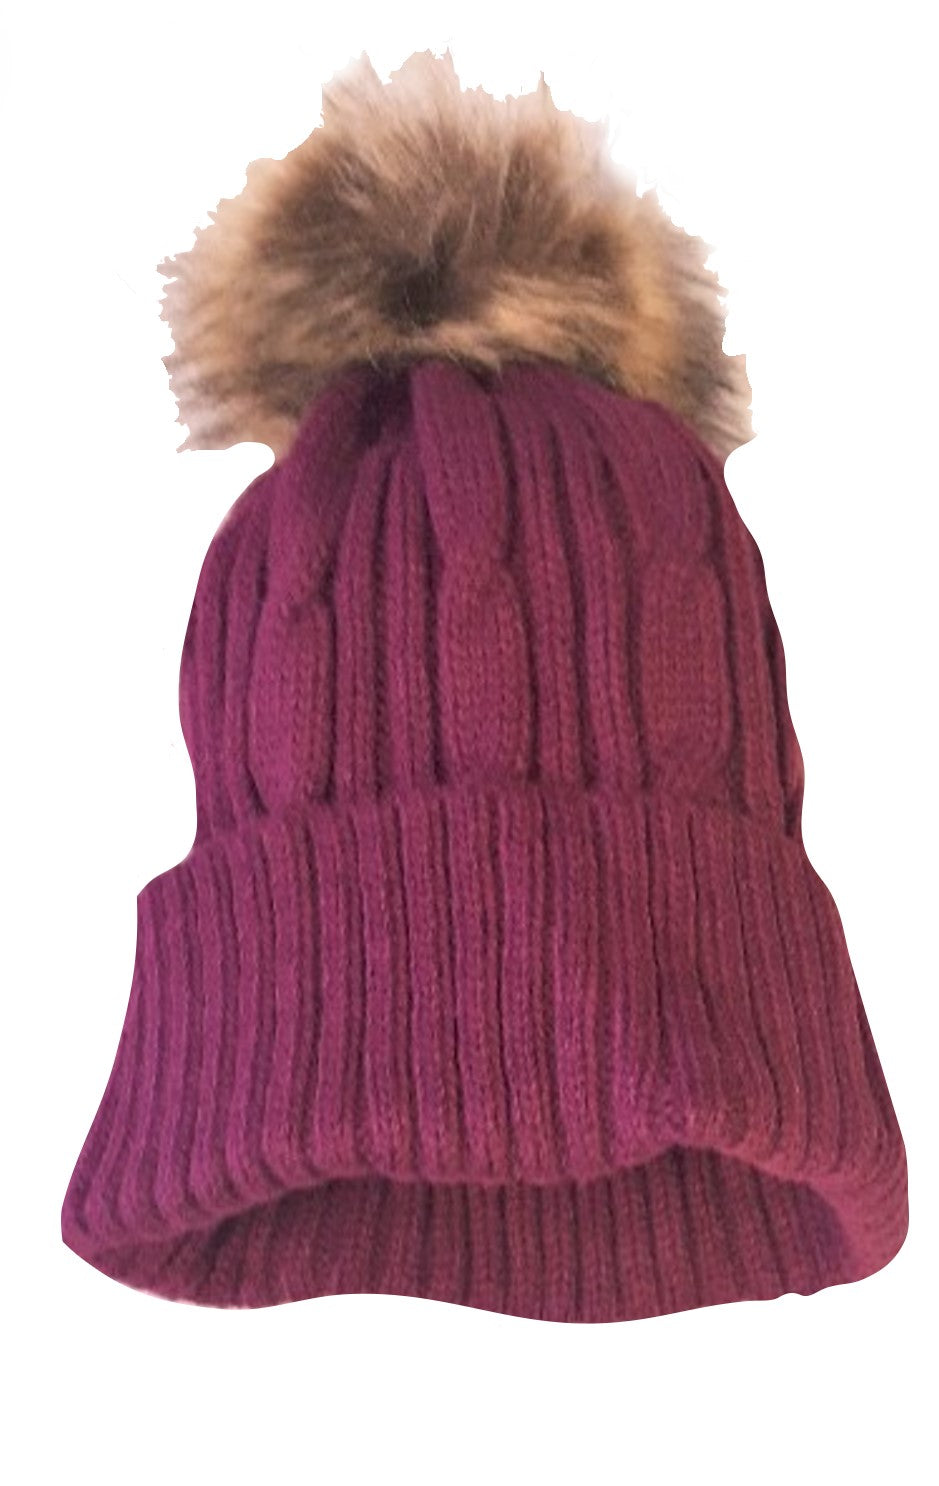 Ladies Purple Chunky Knit Hat with Faux Fur Bobble